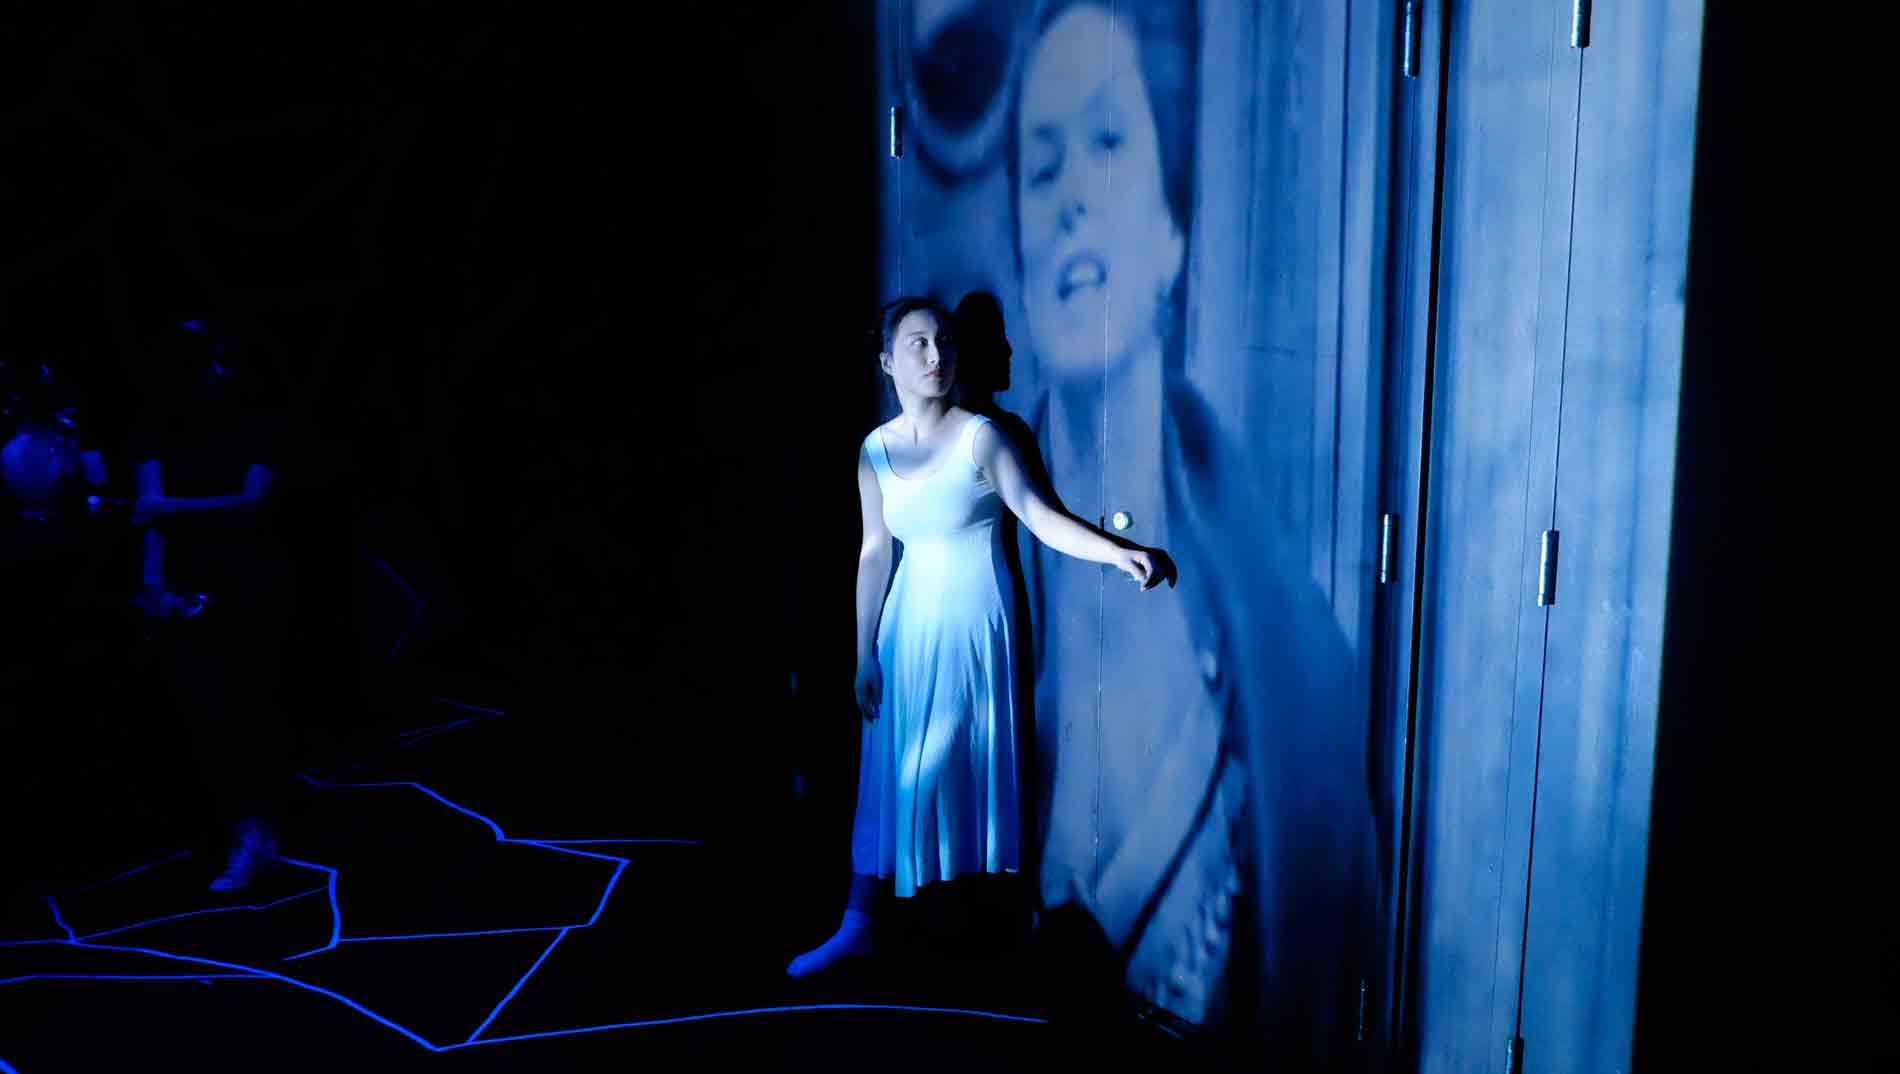 Lone performer gazes at an image projected on a wall